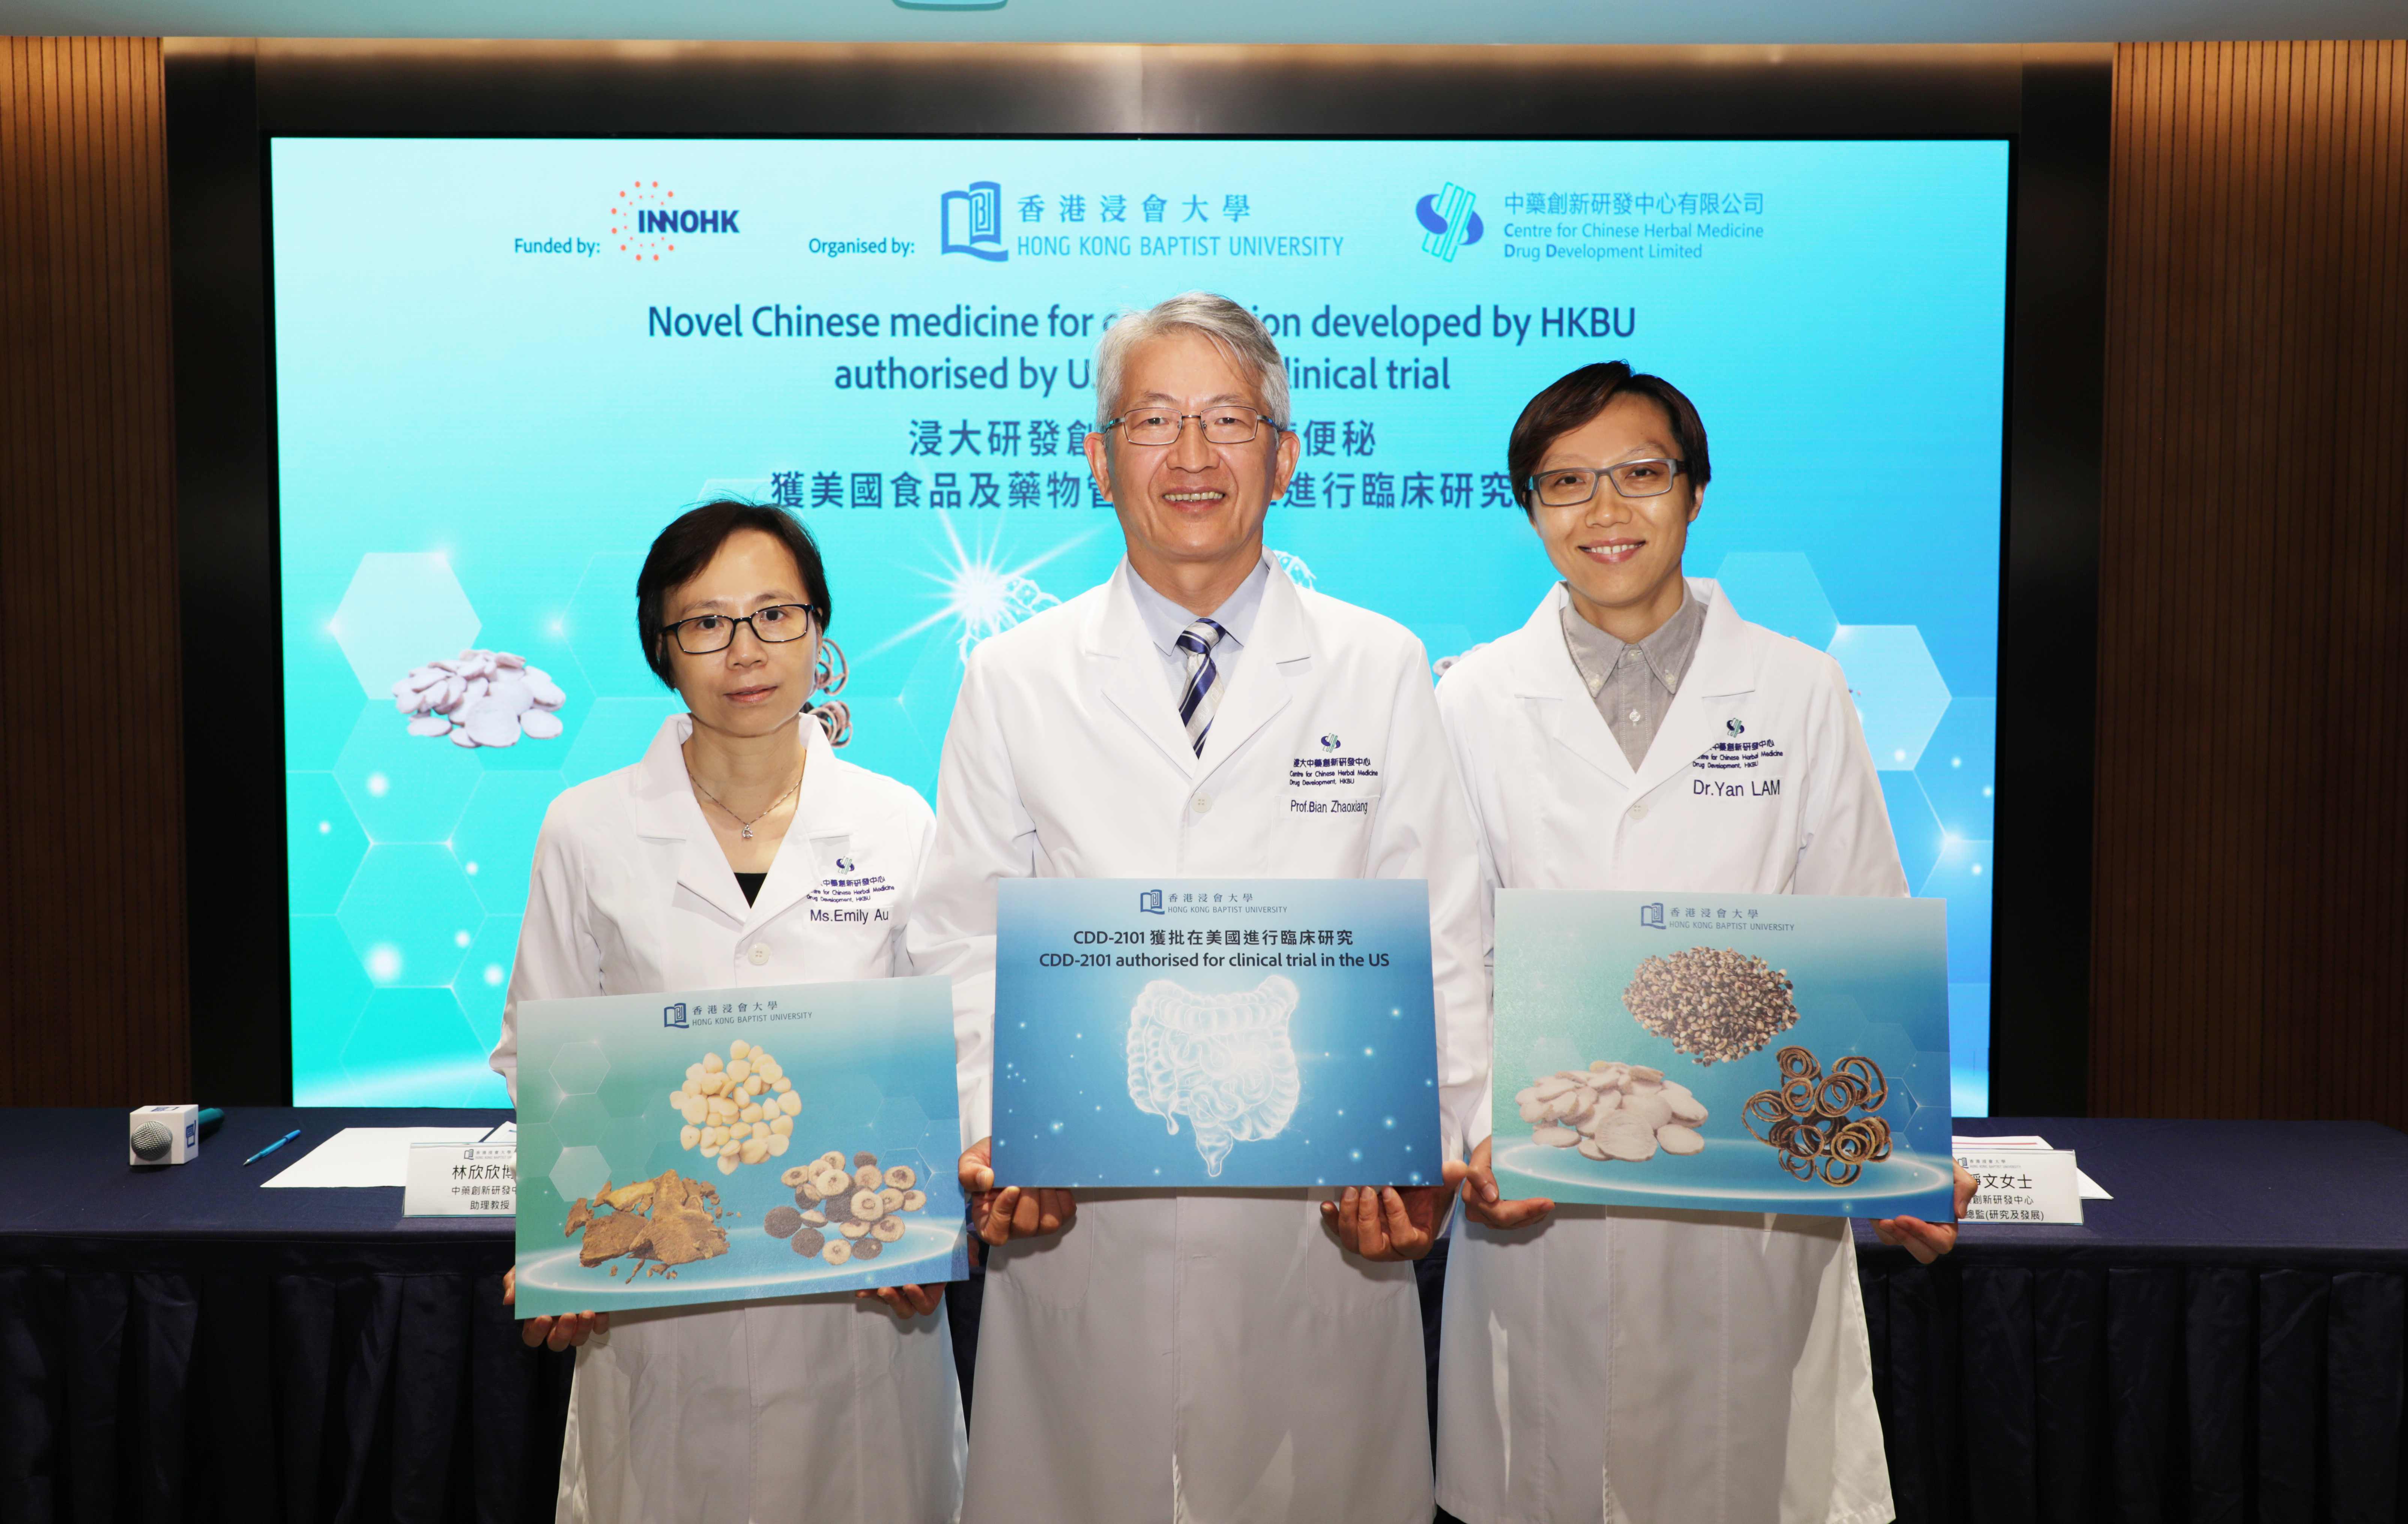 Professor Bian Zhaoxiang (middle), Associate Vice-President (Chinese Medicine Development) and Director of the CDD; Ms Emily Au (left), Assistant Director (Research and Development) of the CDD; and Dr Lam Yan-yan (right), Assistant Professor of the CDD at HKBU, announce that CDD-2101, a novel Chinese medicine for treating chronic constipation, has been authorised by U.S. FDA to conduct a phase I clinical trial of the new drug in the US.